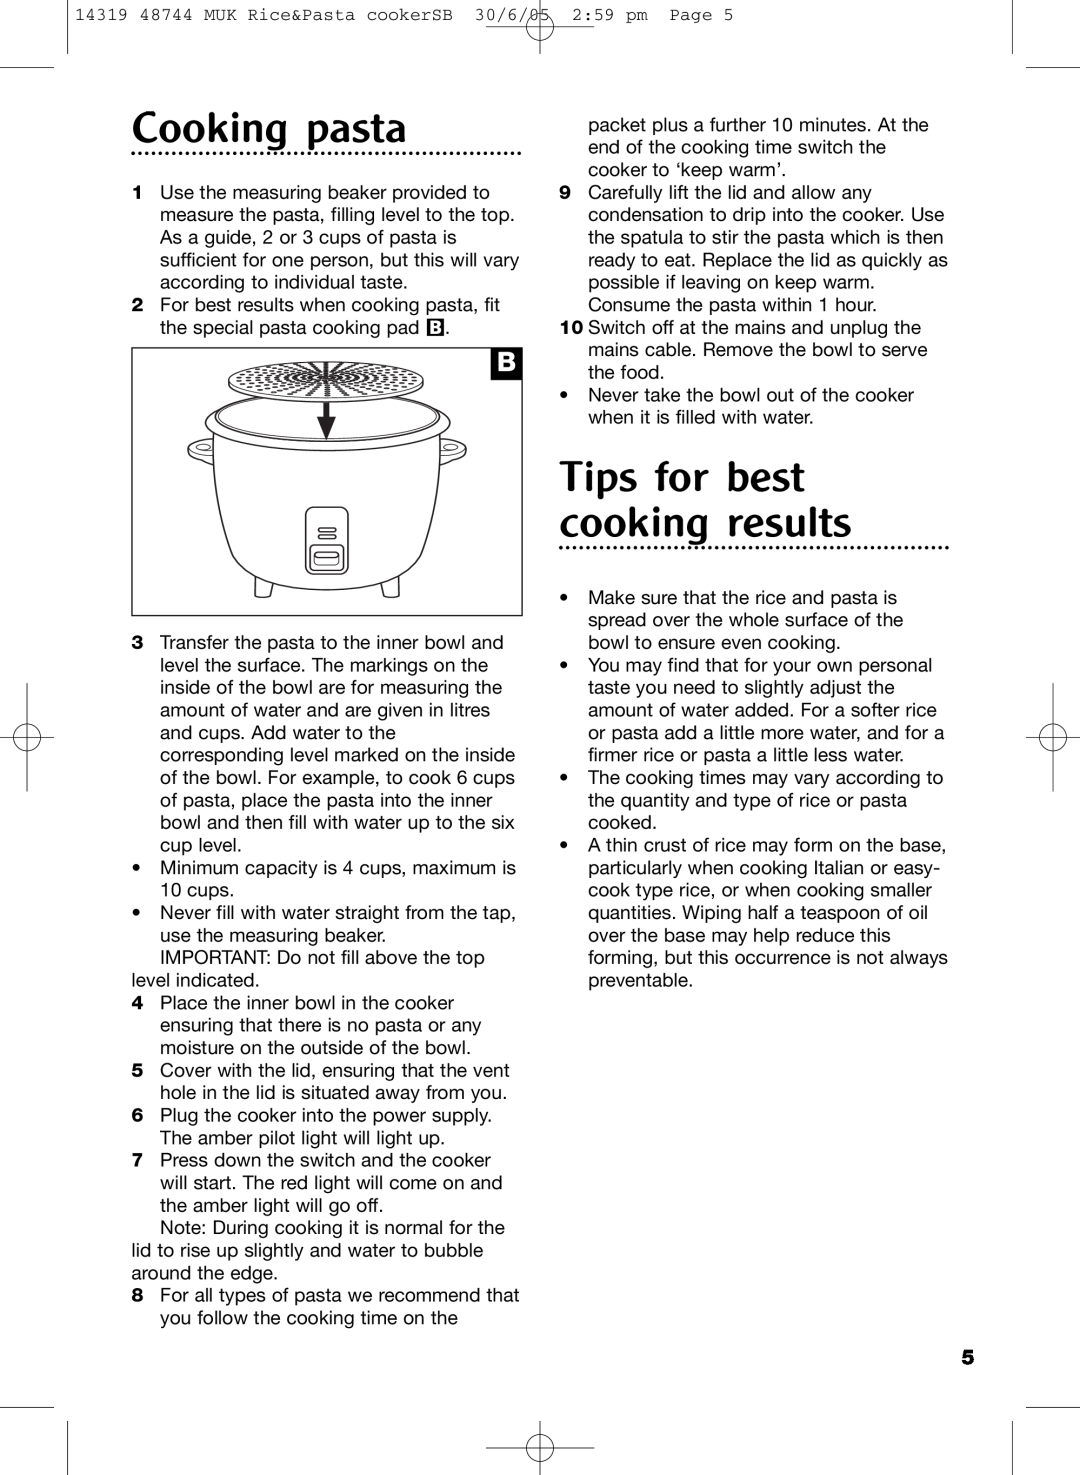 Morphy Richards cooker manual Cooking pasta, Tips for best cooking results 